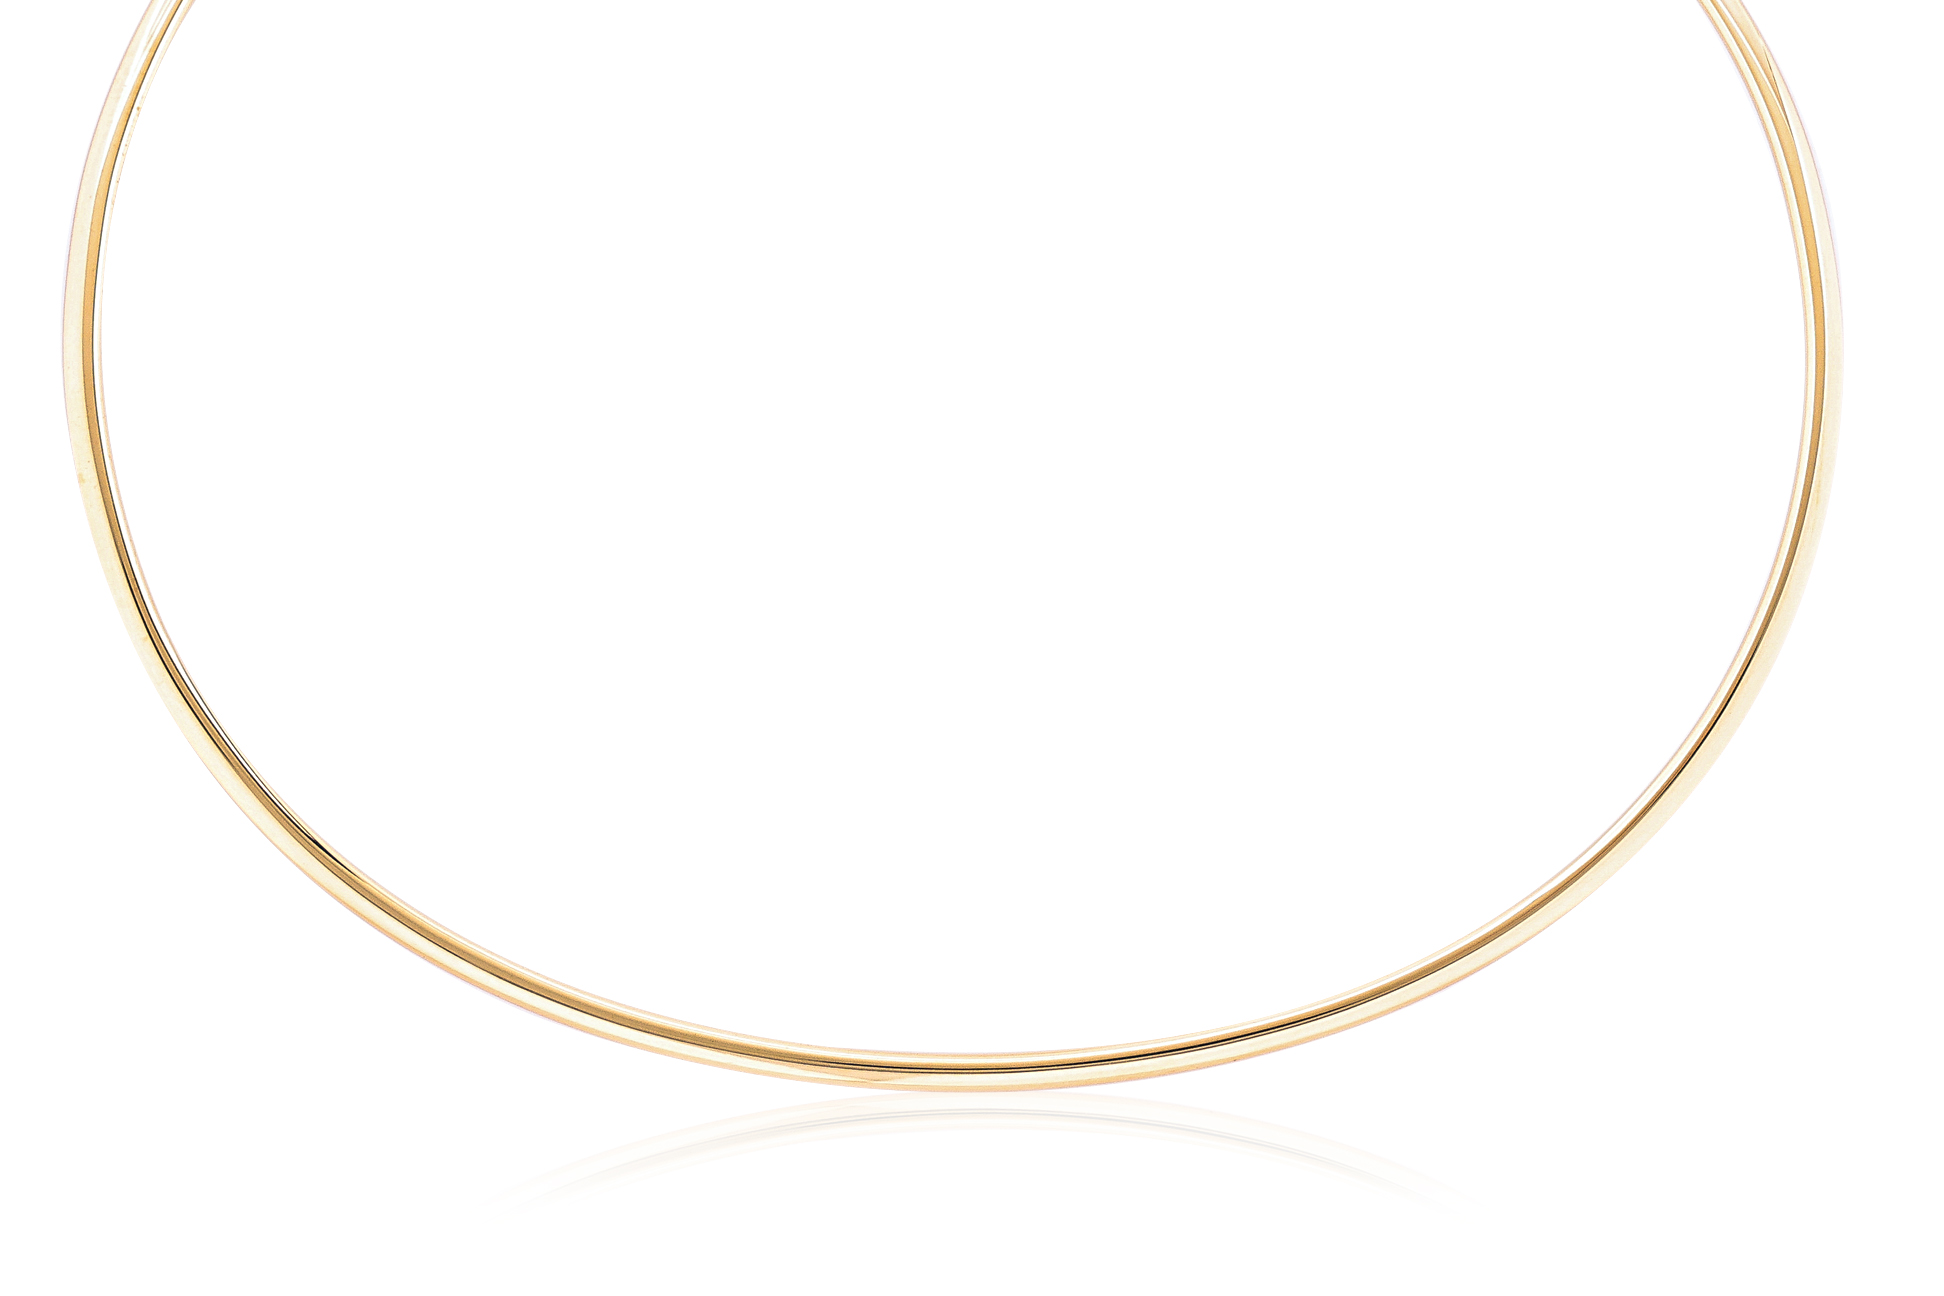 A GOLD TORQUE NECKLACE BY GEORG JENSEN - Image 2 of 4